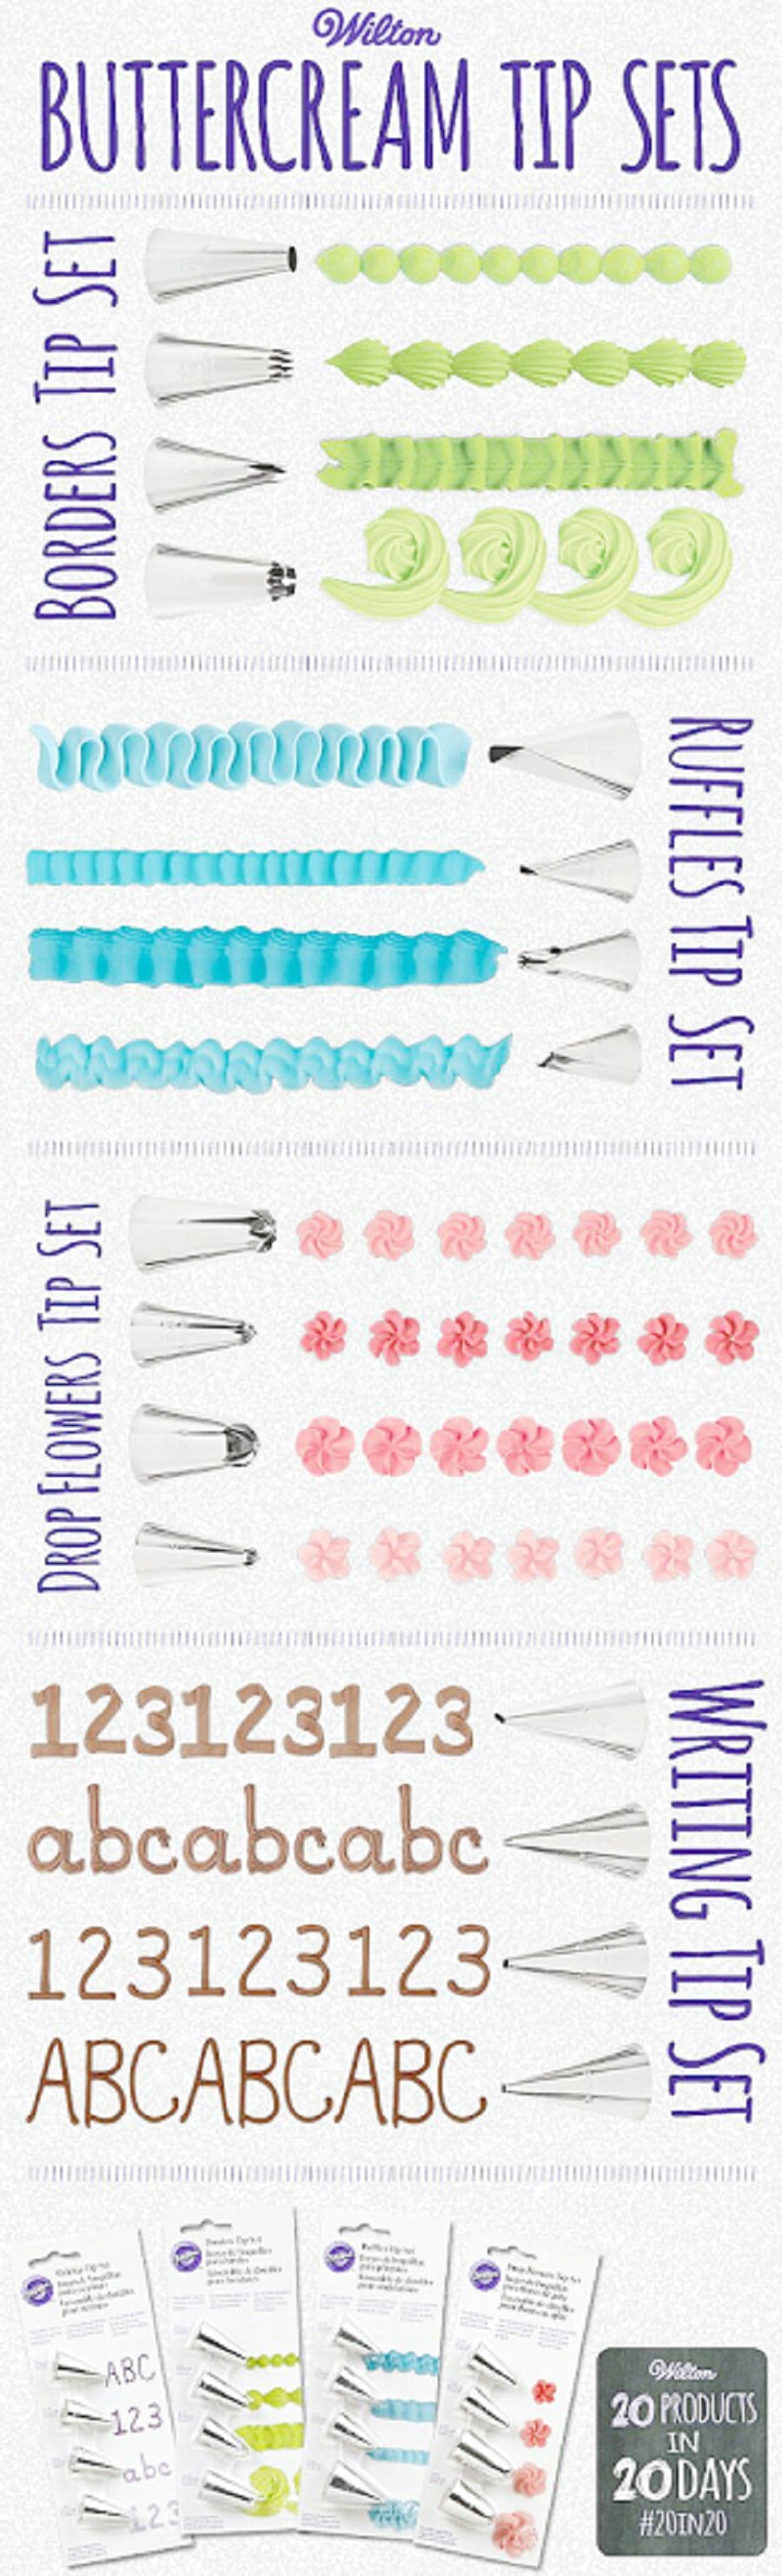 22. Learn your buttercream tip sets.